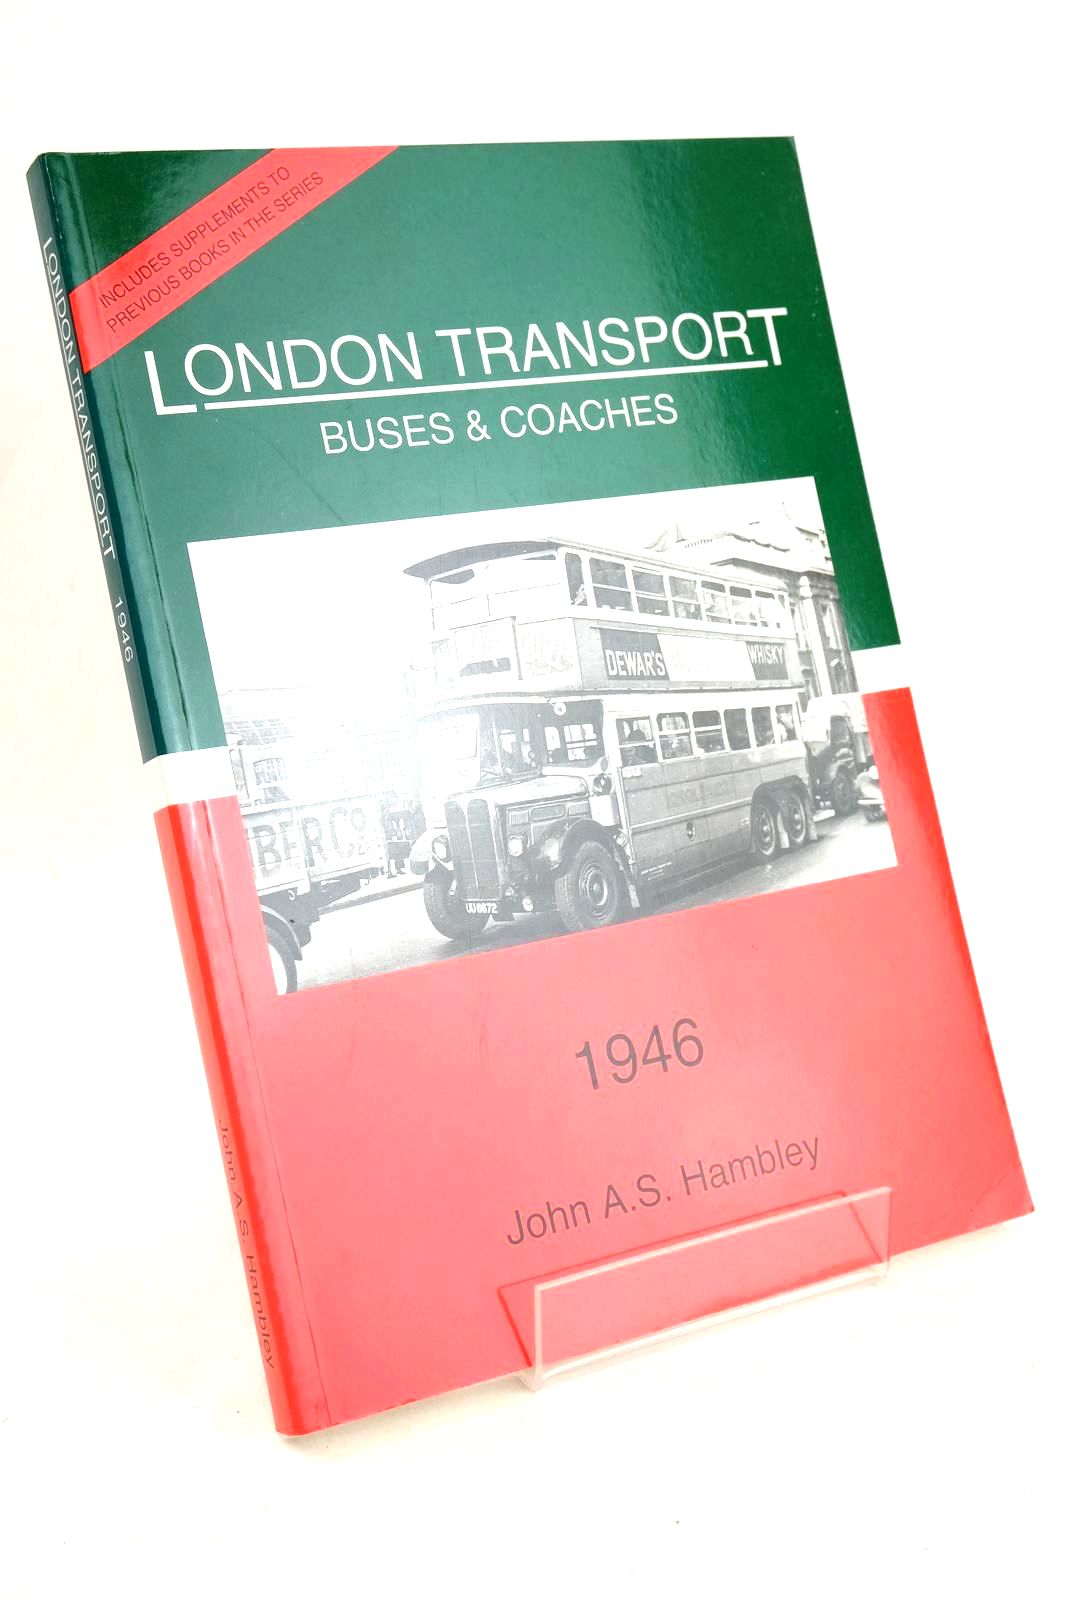 Photo of LONDON TRANSPORT BUSES & COACHES 1946 written by Hambley, John A.S. published by Images Publishing (STOCK CODE: 1327370)  for sale by Stella & Rose's Books